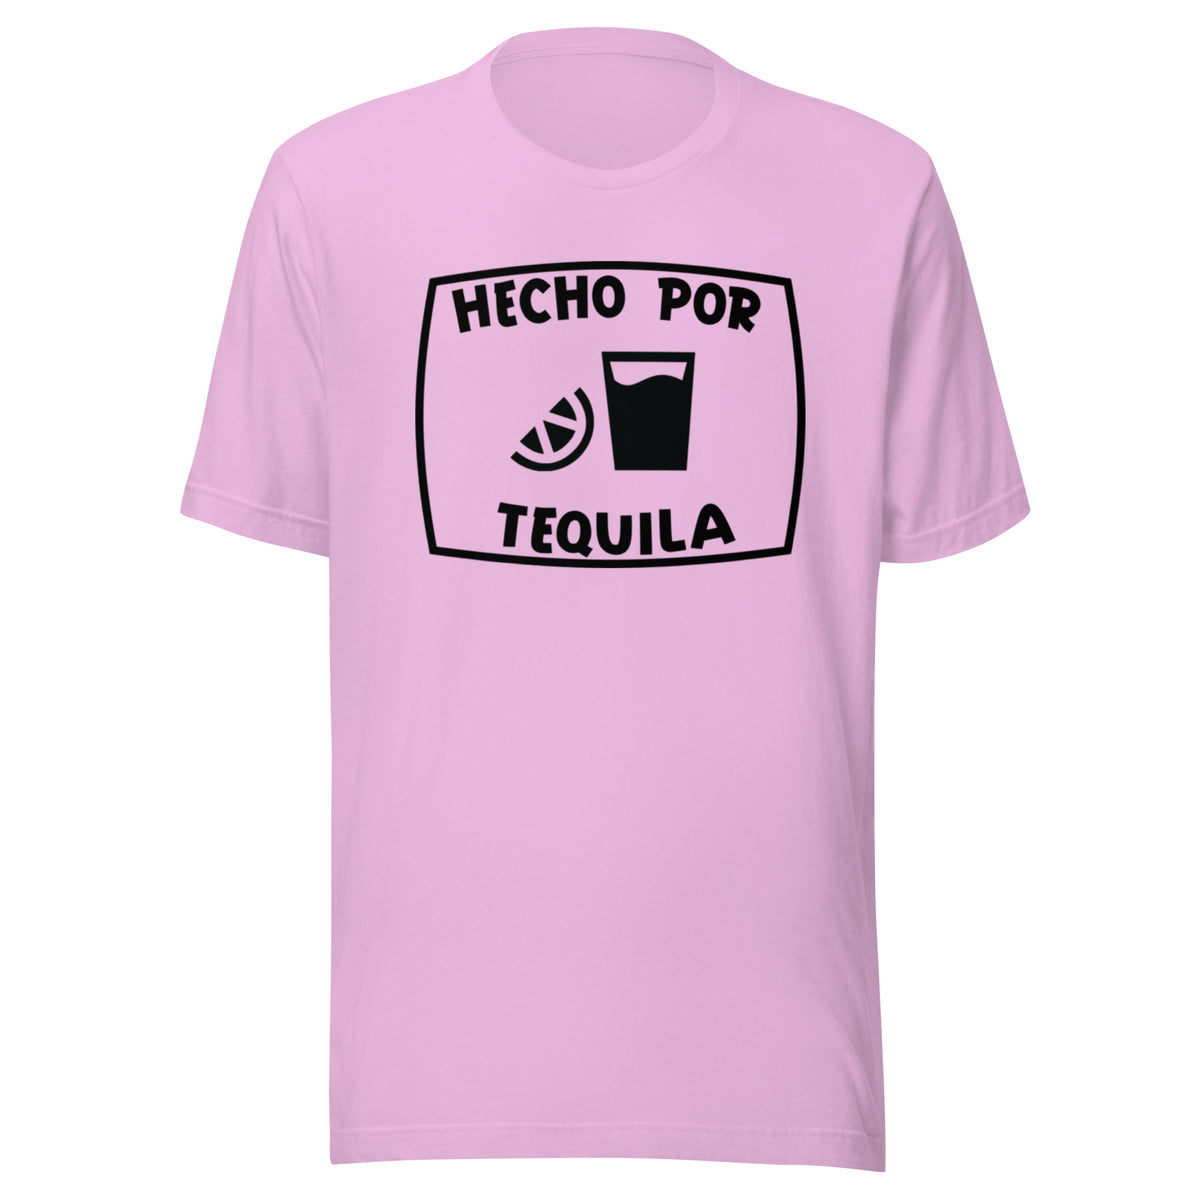 Hecho por Tequila T-shirt (Made by Tequila)